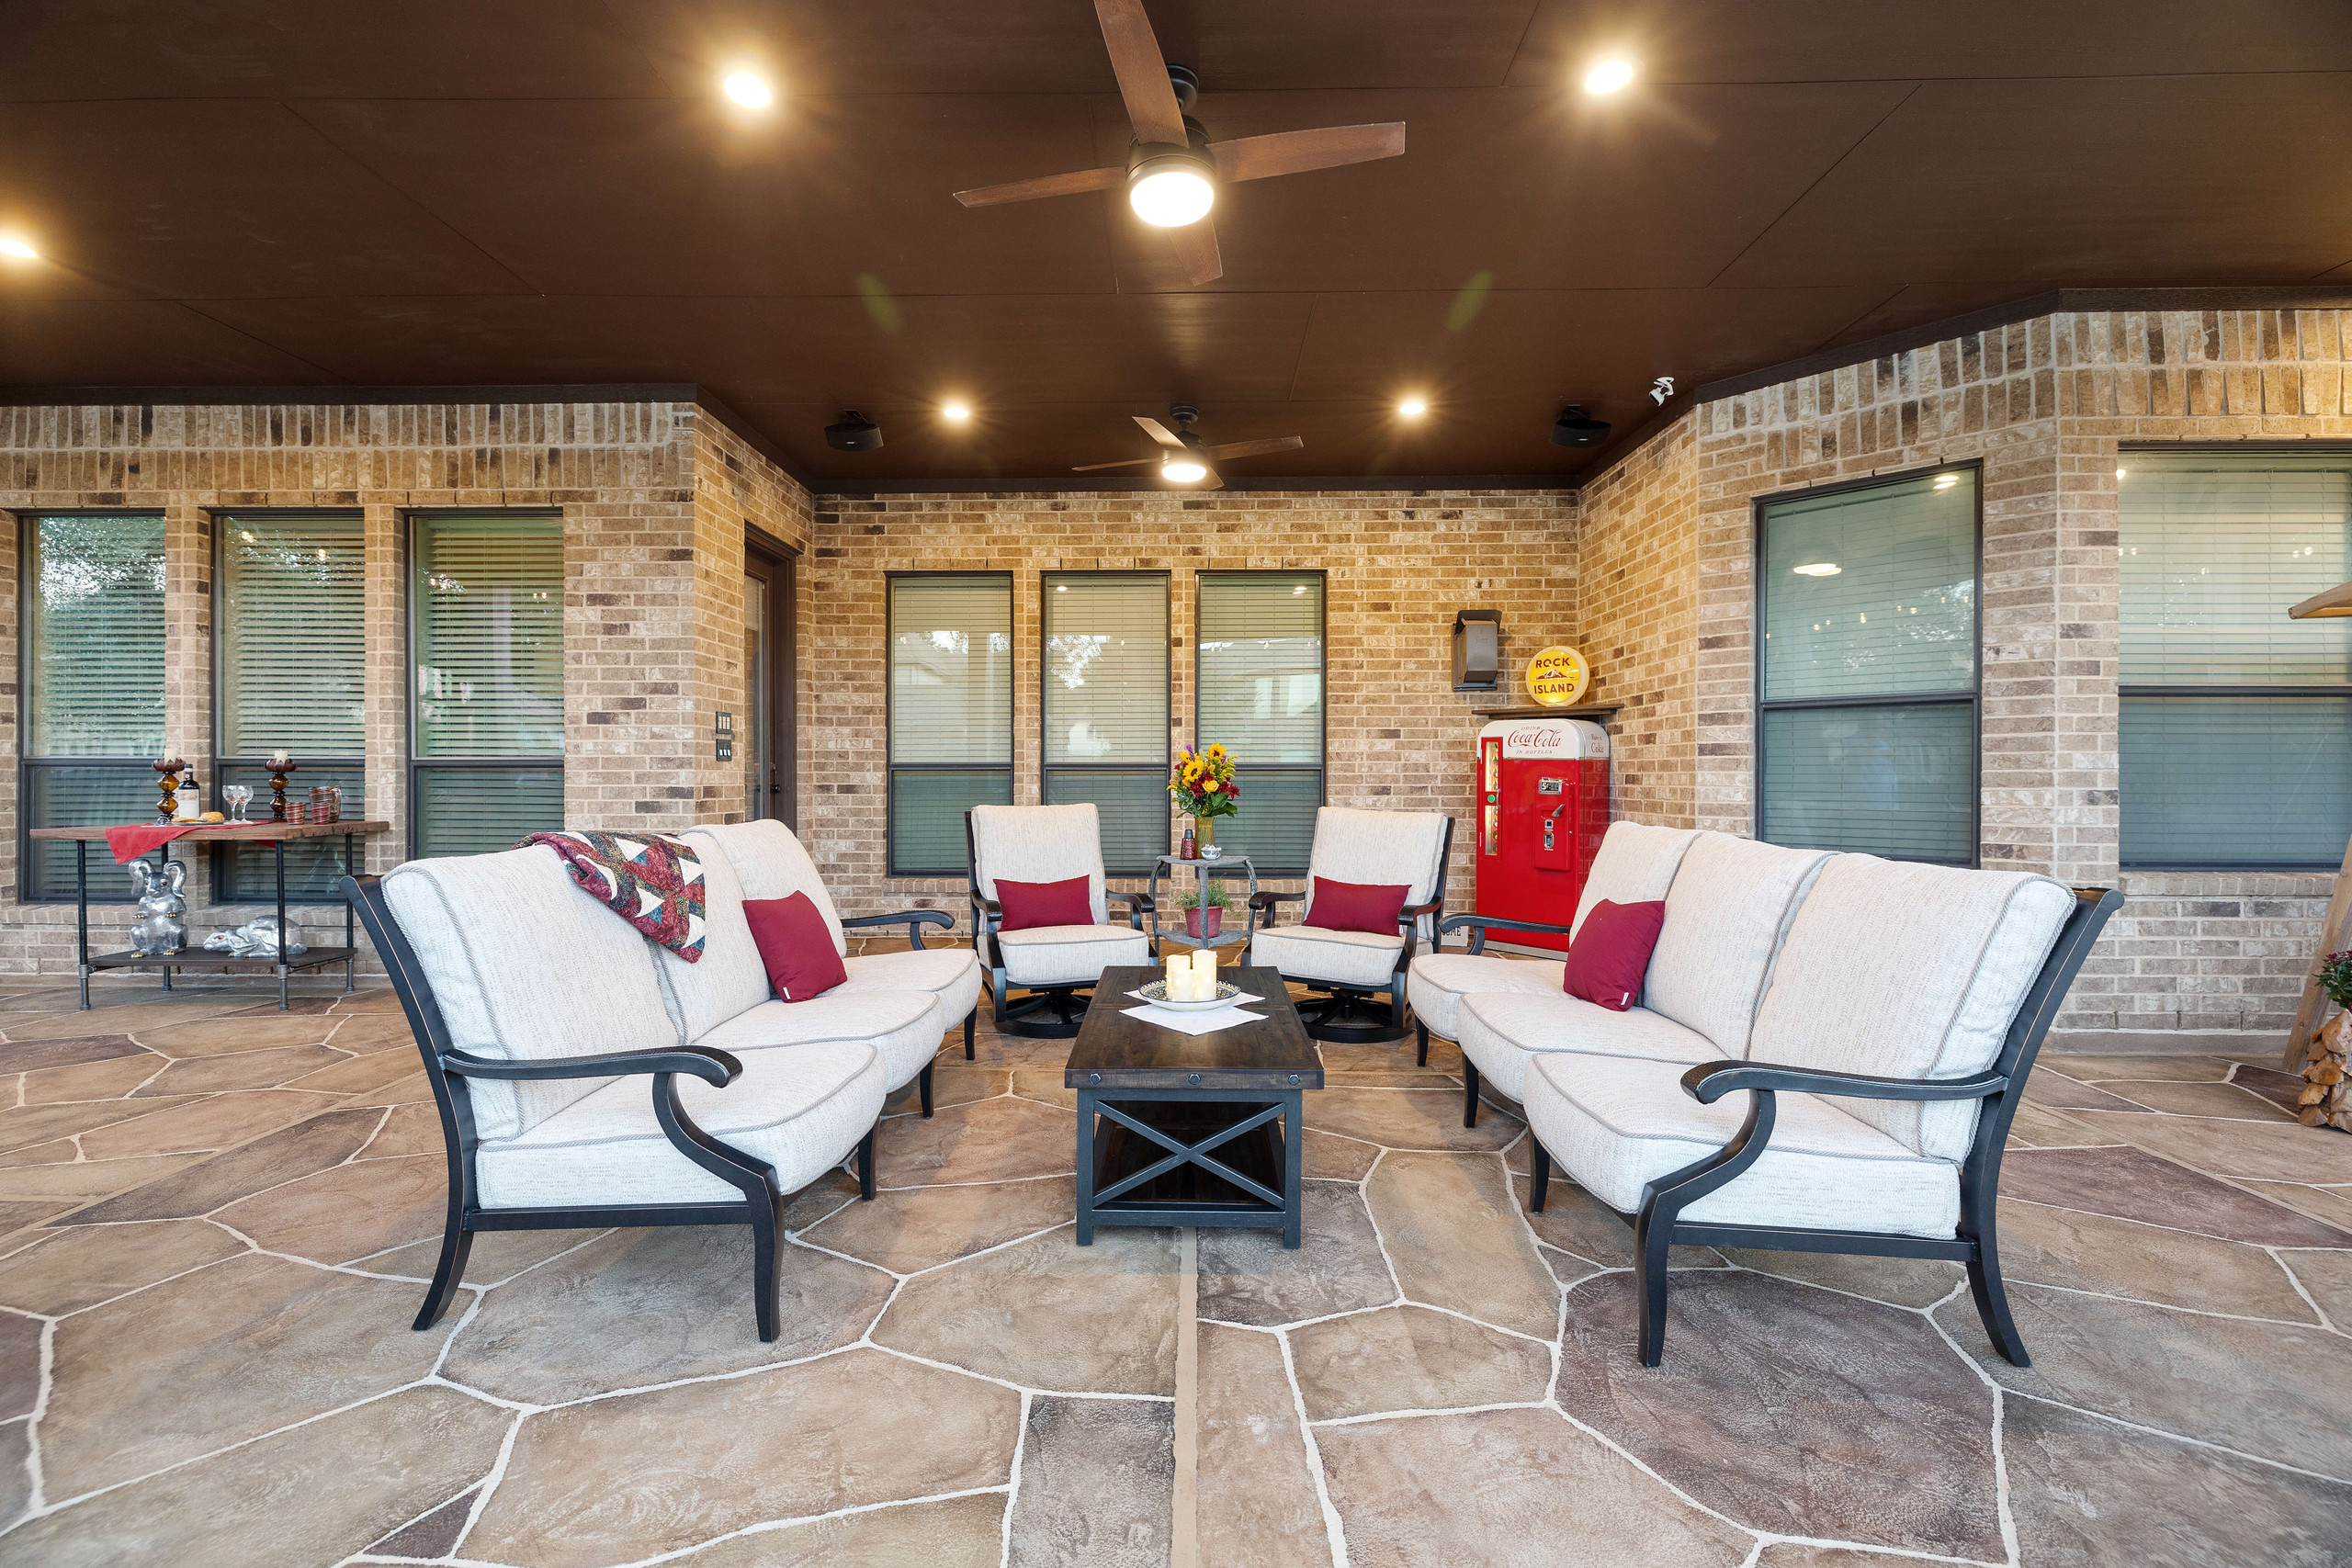 Backyard seating area underneath covered patio with carvestone overlay